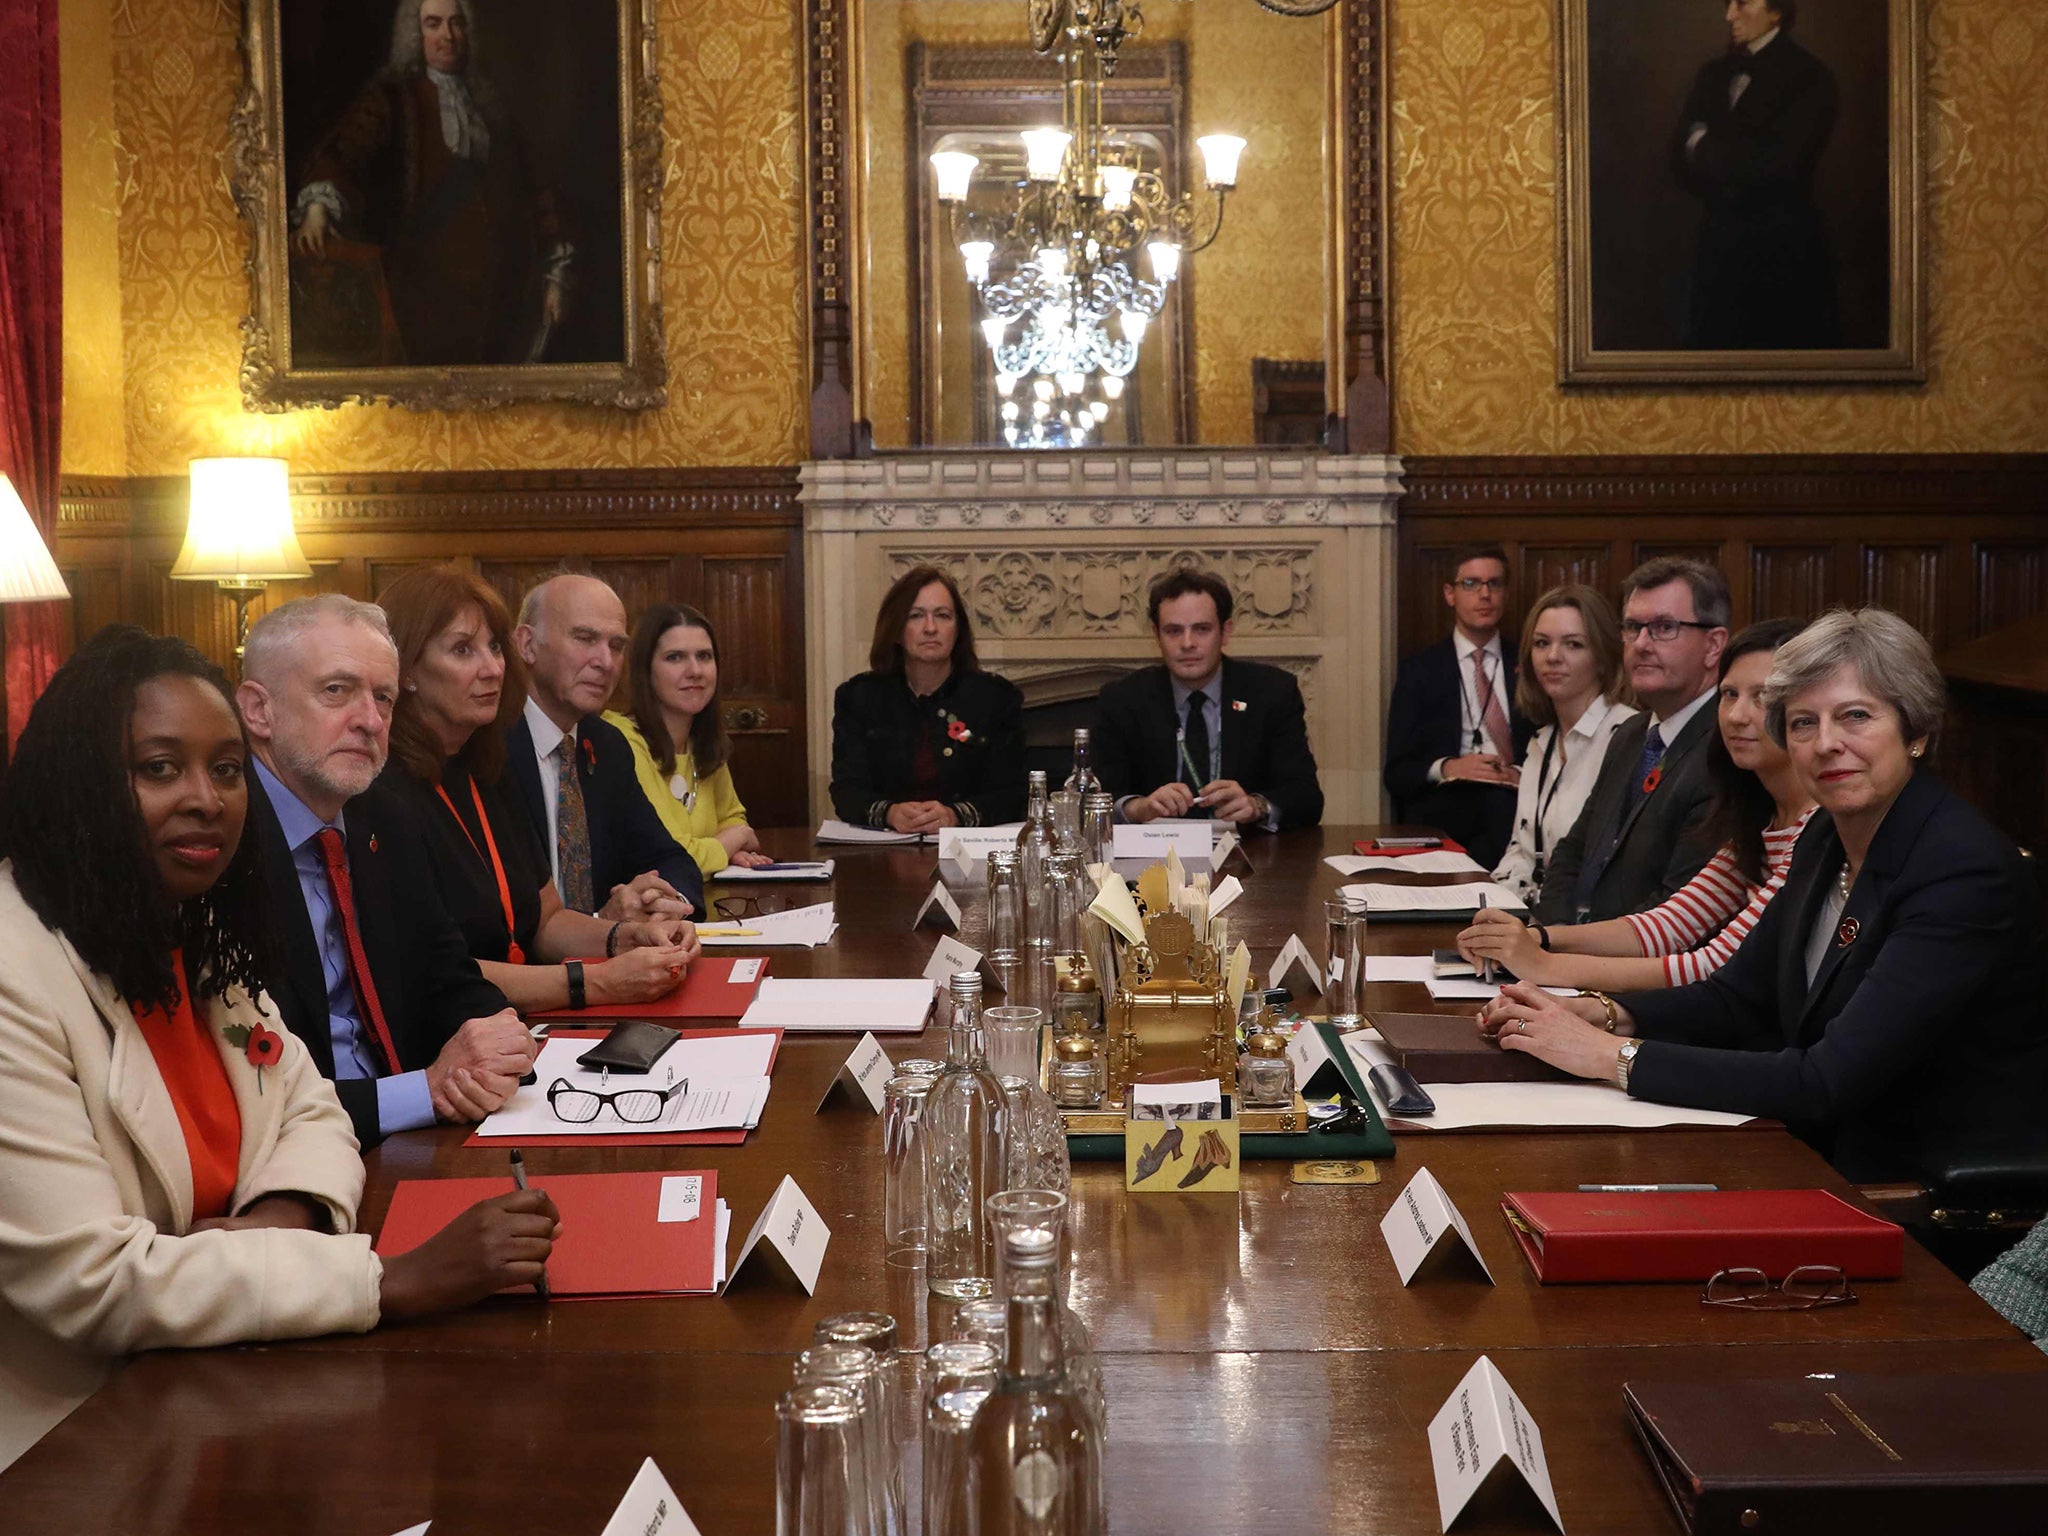 Westminster party leaders and politicians gather in the Prime Minister's Office to discuss sexual abuse claims